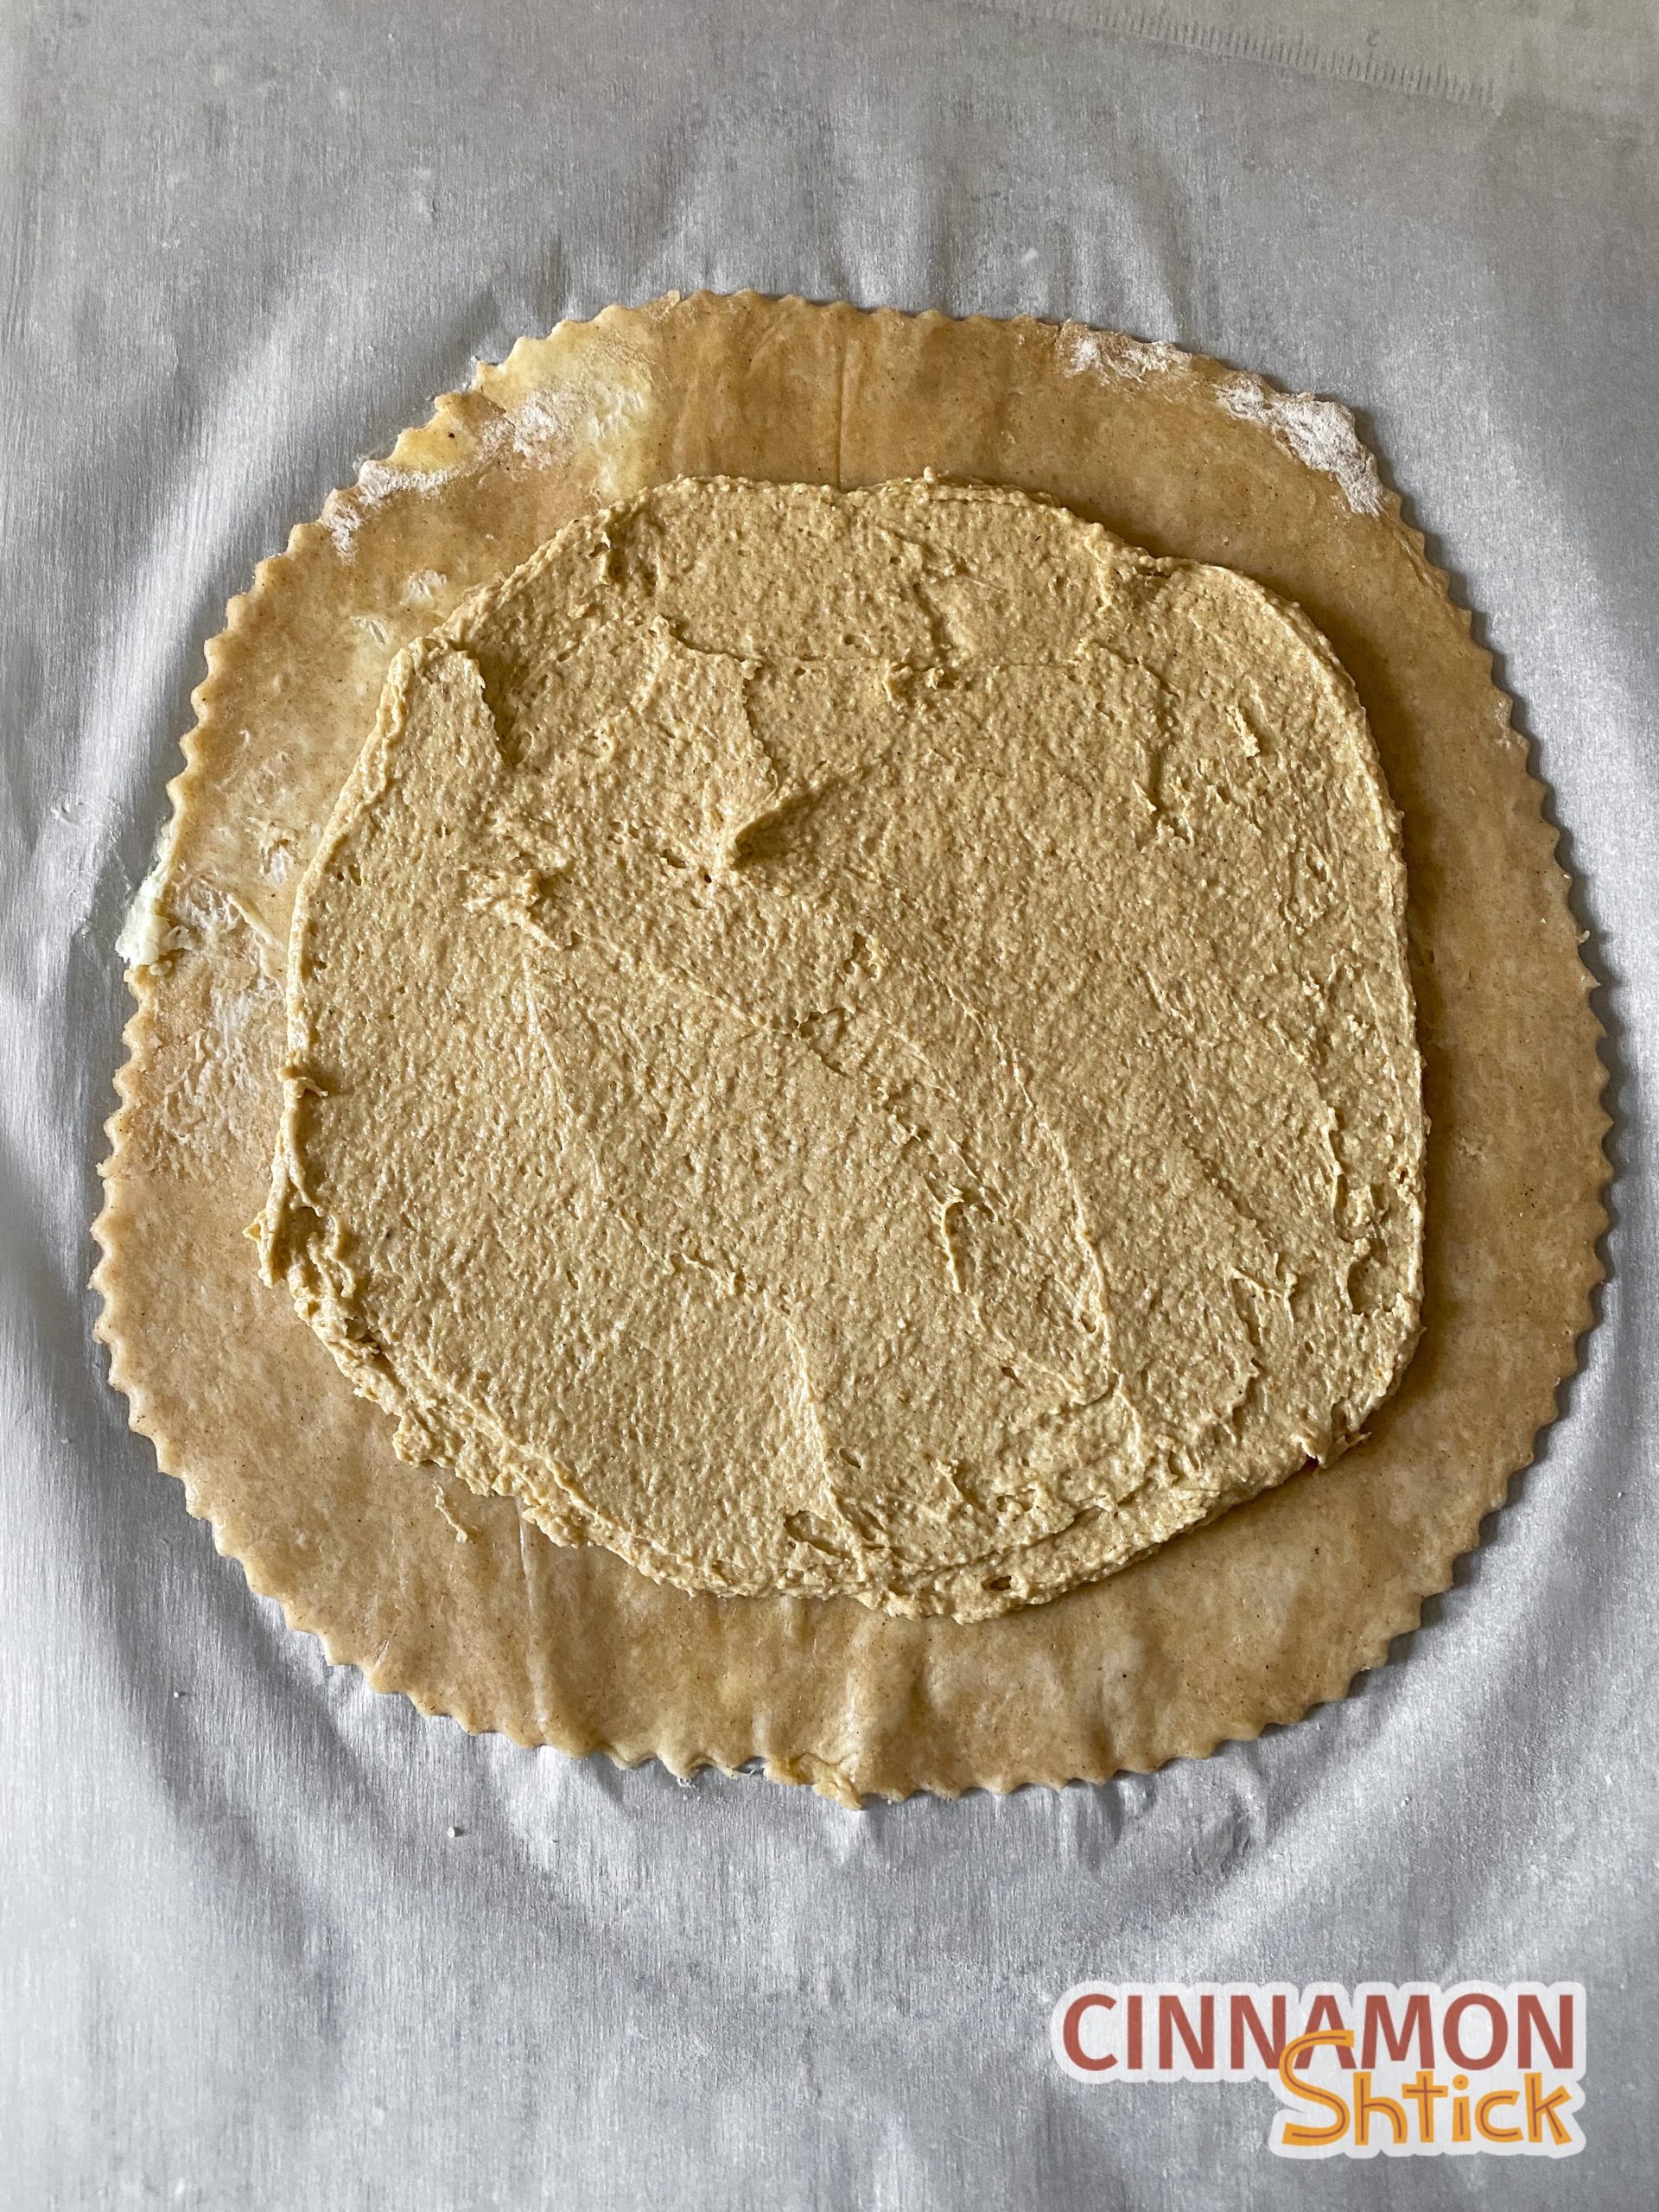 galette dough rolled to a disc with oatmeal cream spread on it